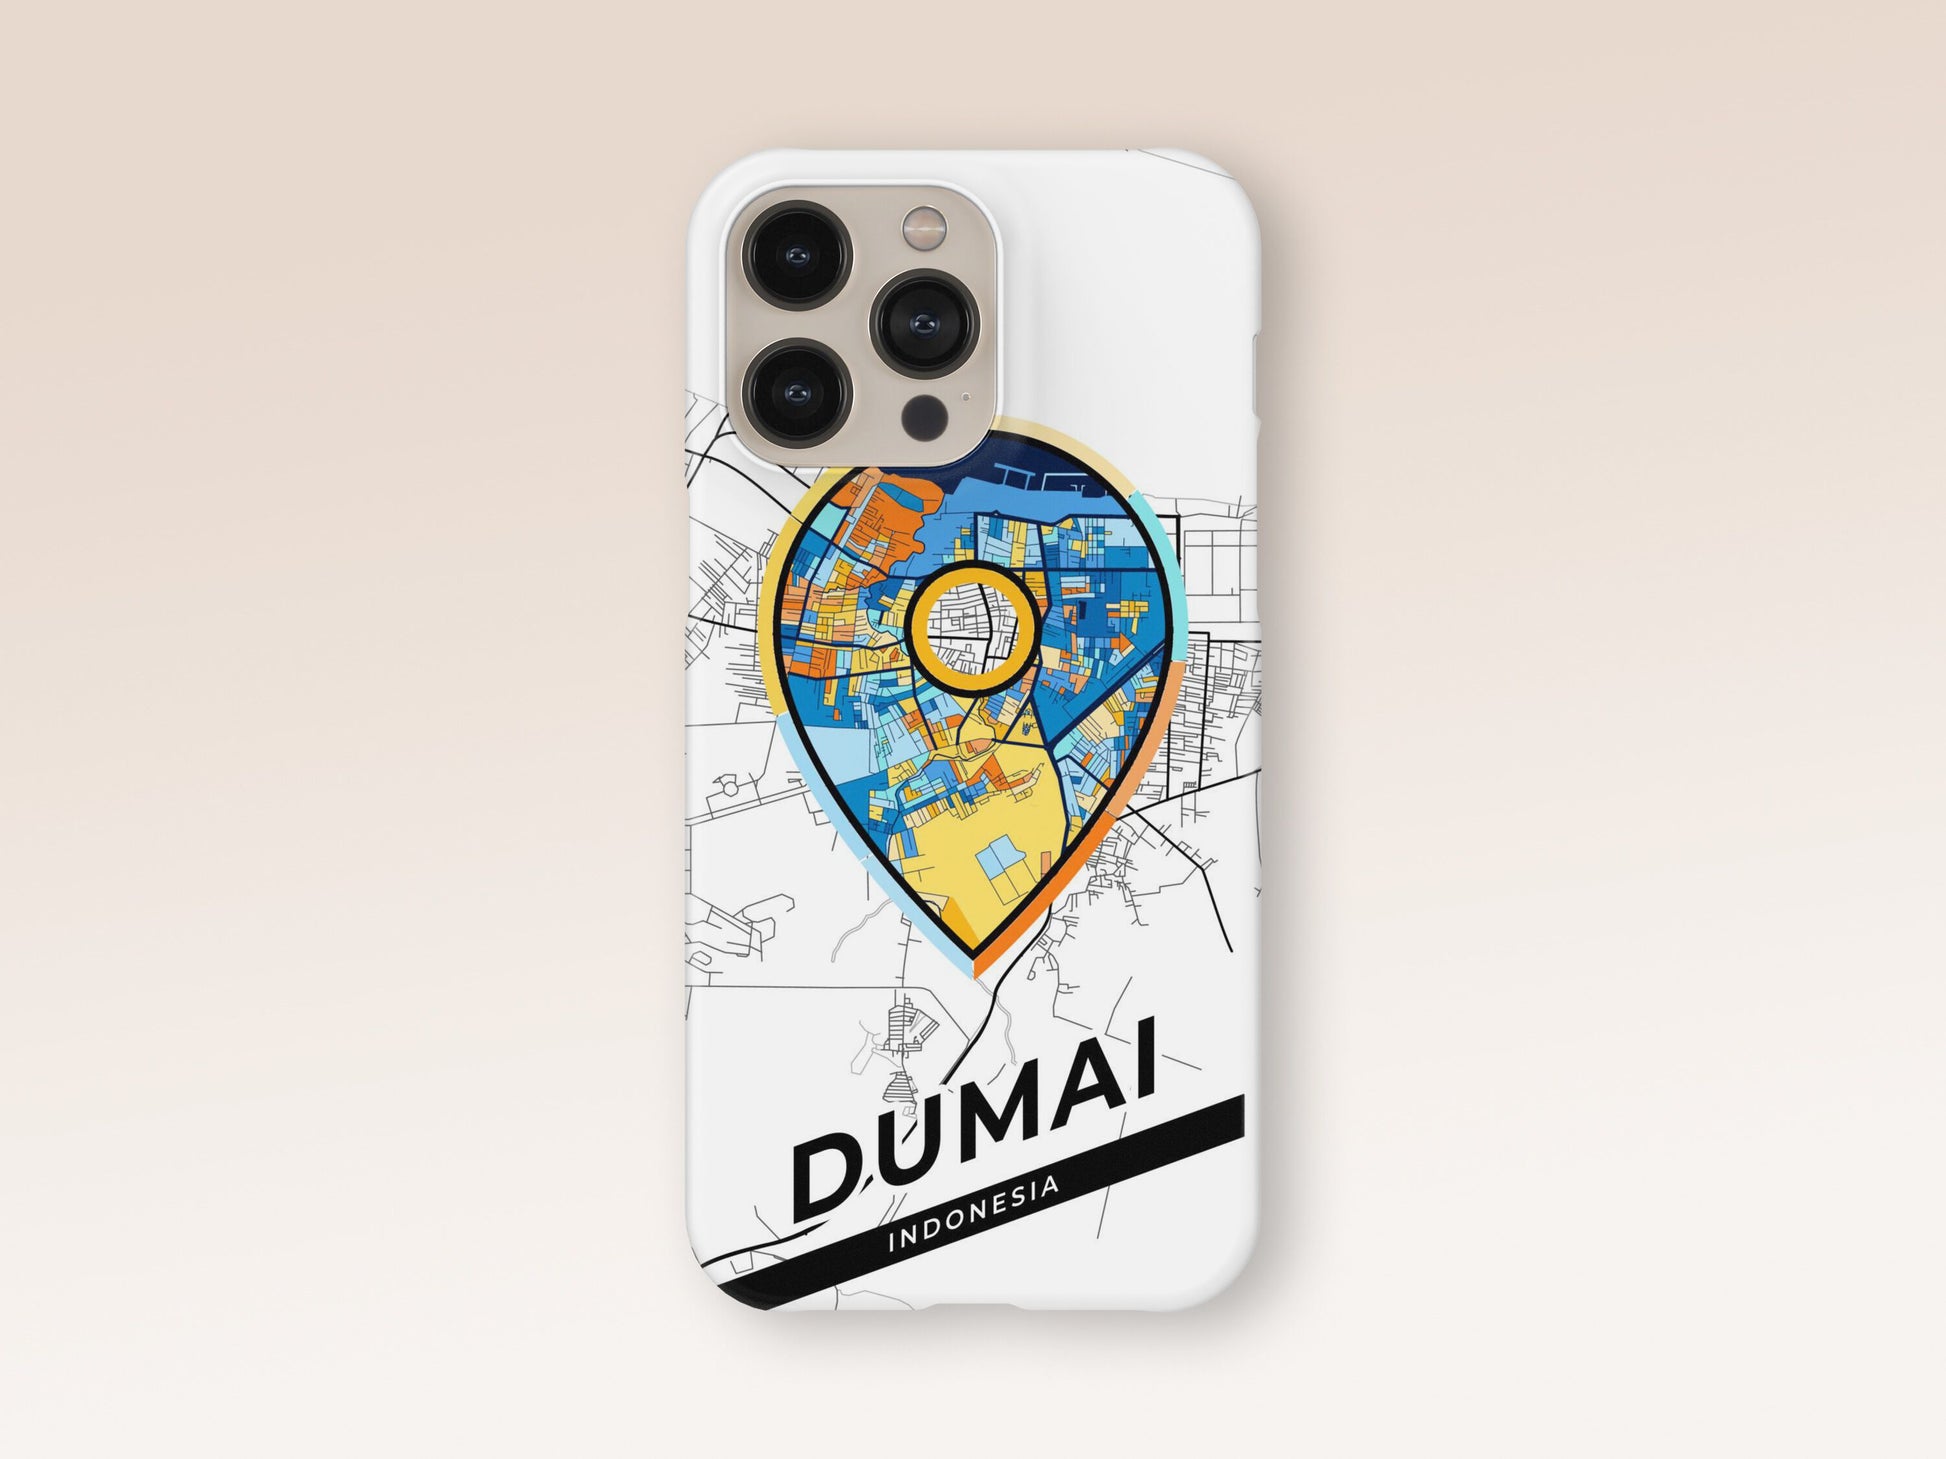 Dumai Indonesia slim phone case with colorful icon. Birthday, wedding or housewarming gift. Couple match cases. 1